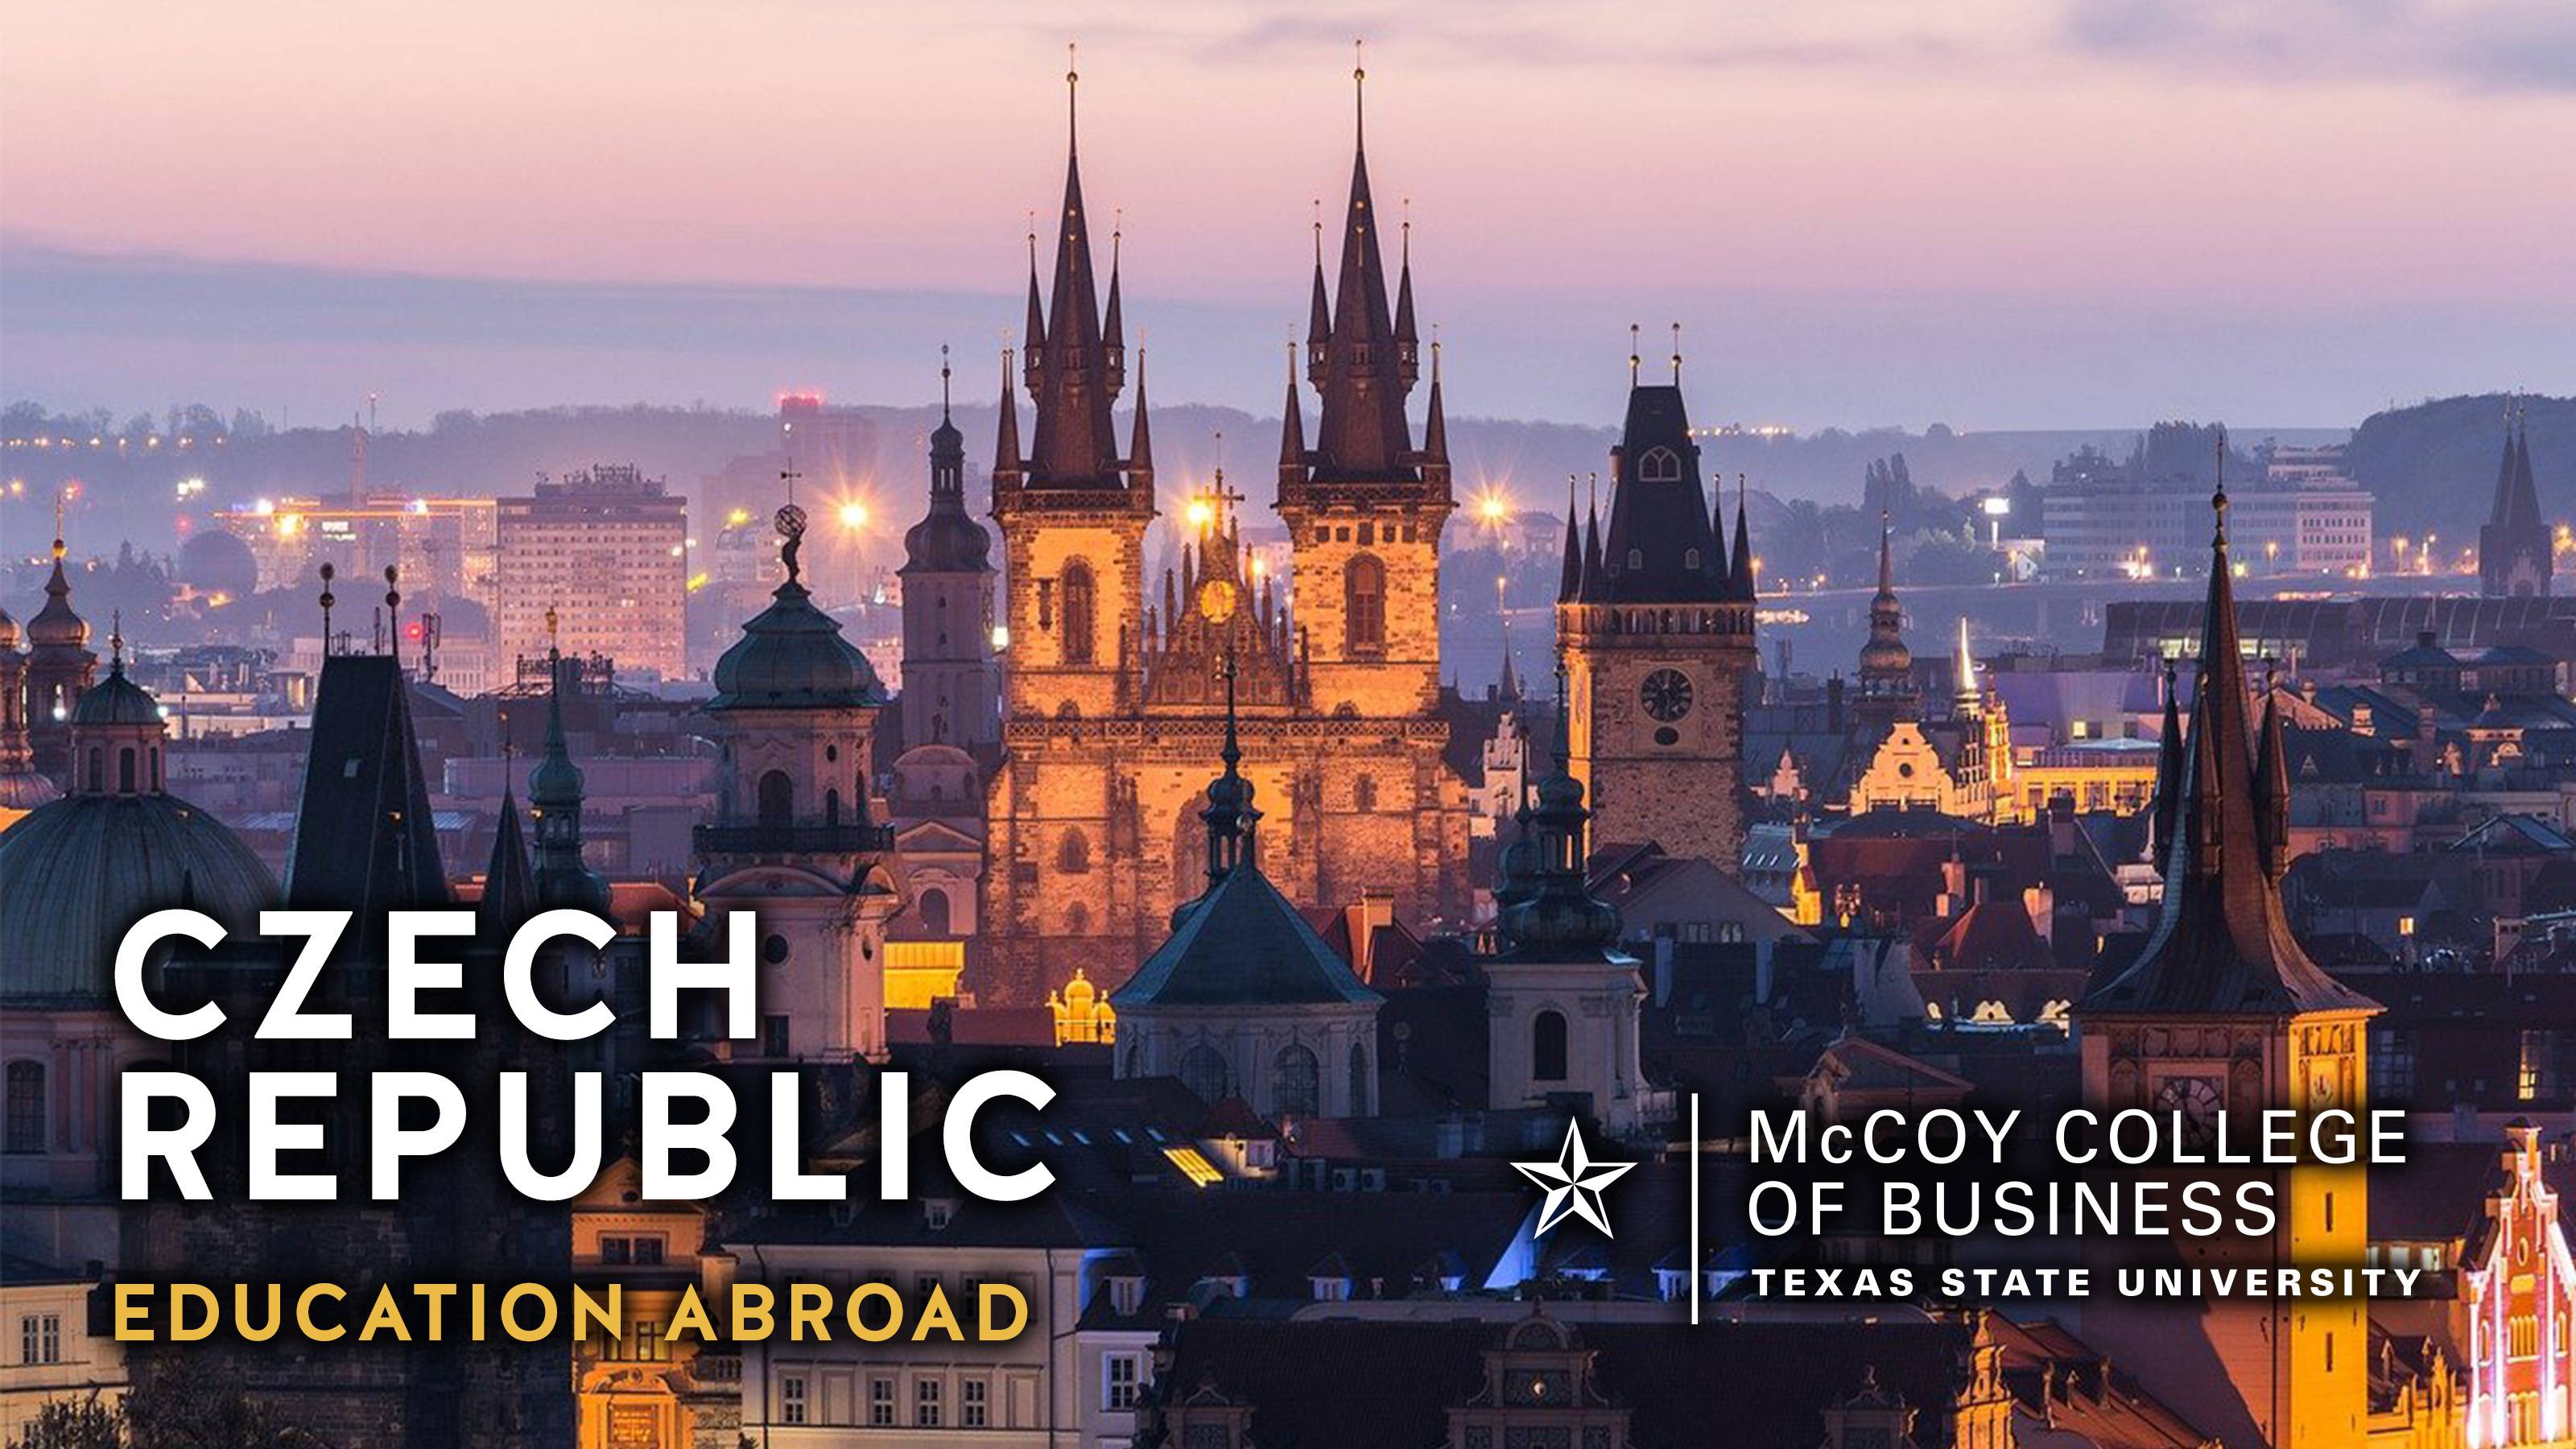 Promotional Video for Education Abroad trip to Prague for Summer 2022